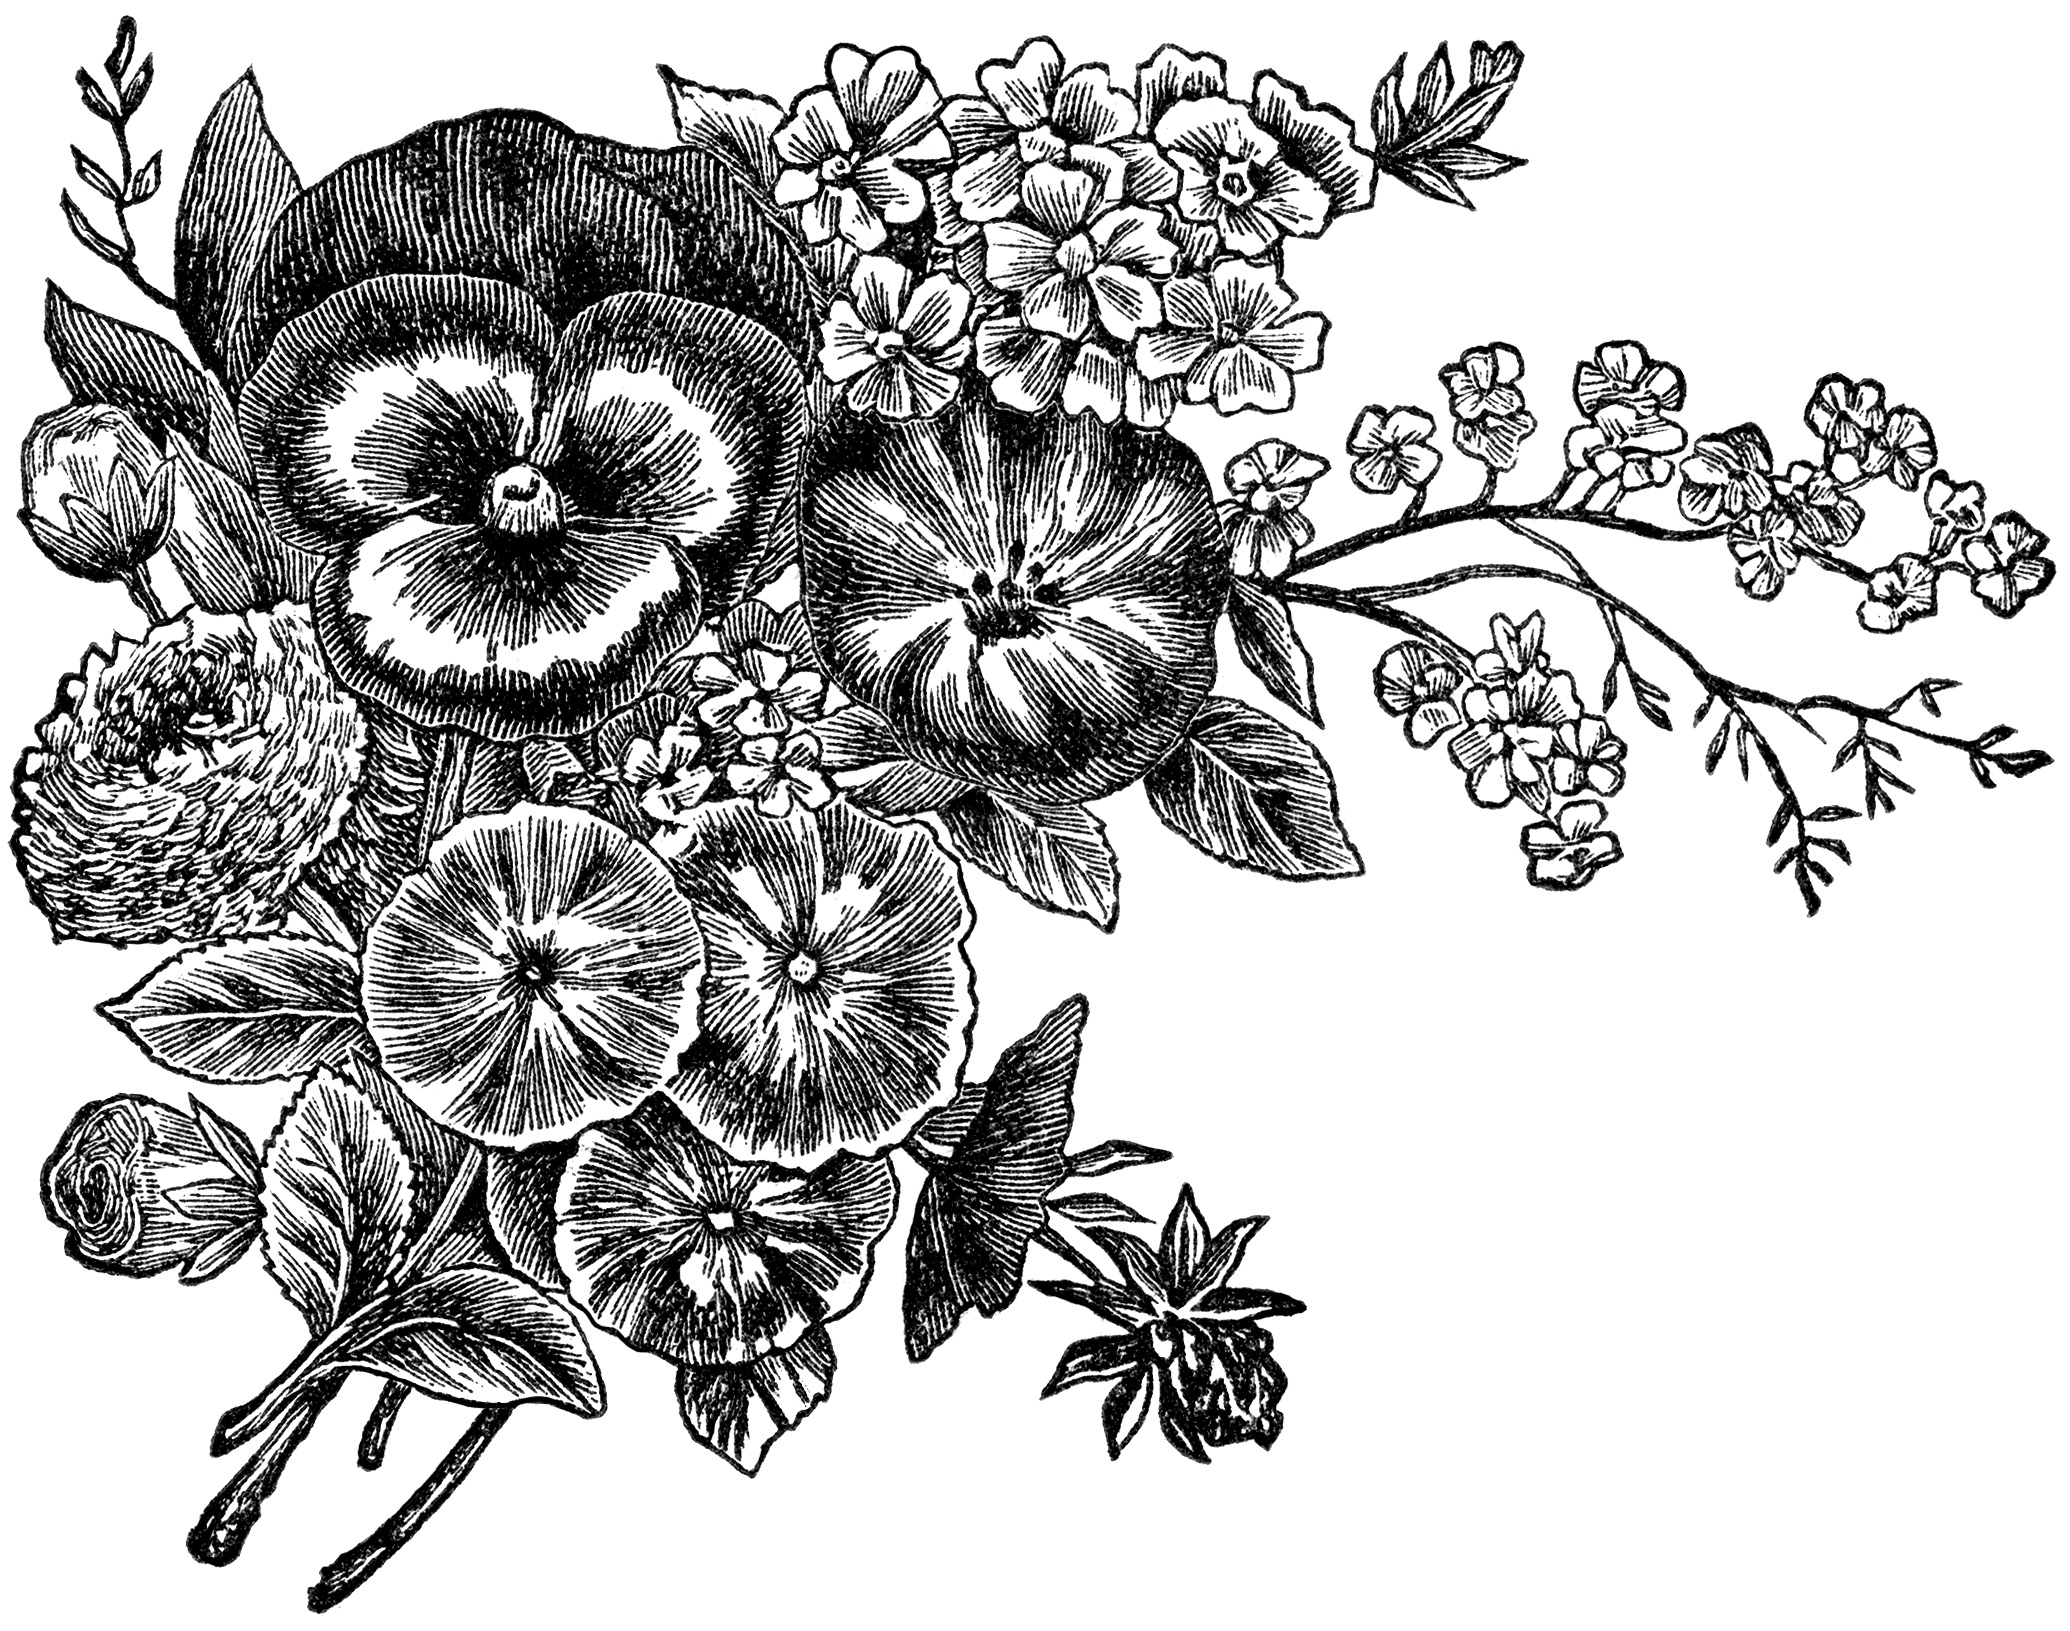 free-black-and-white-flower-png-download-free-black-and-white-flower